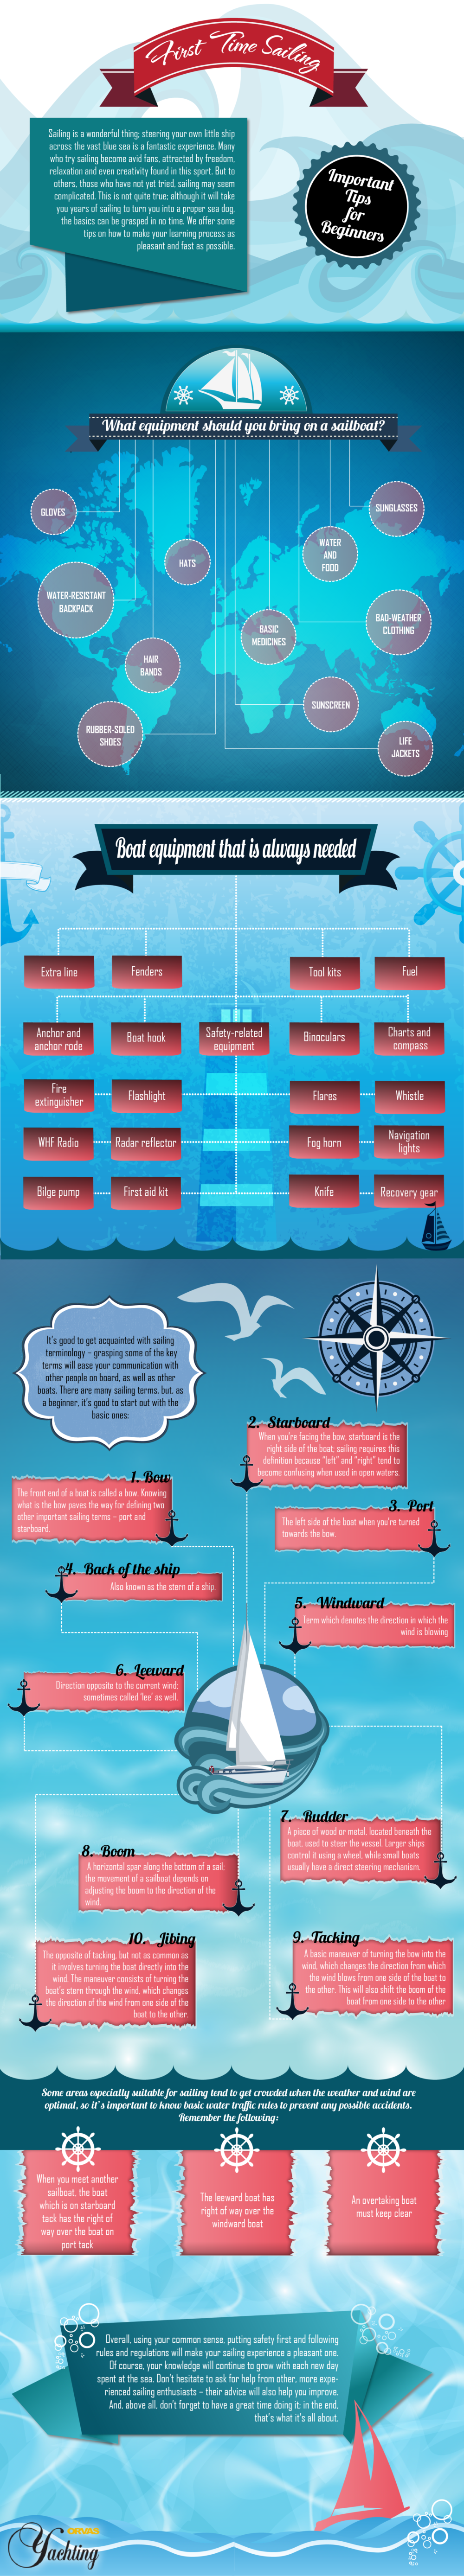 sailing tips infographic